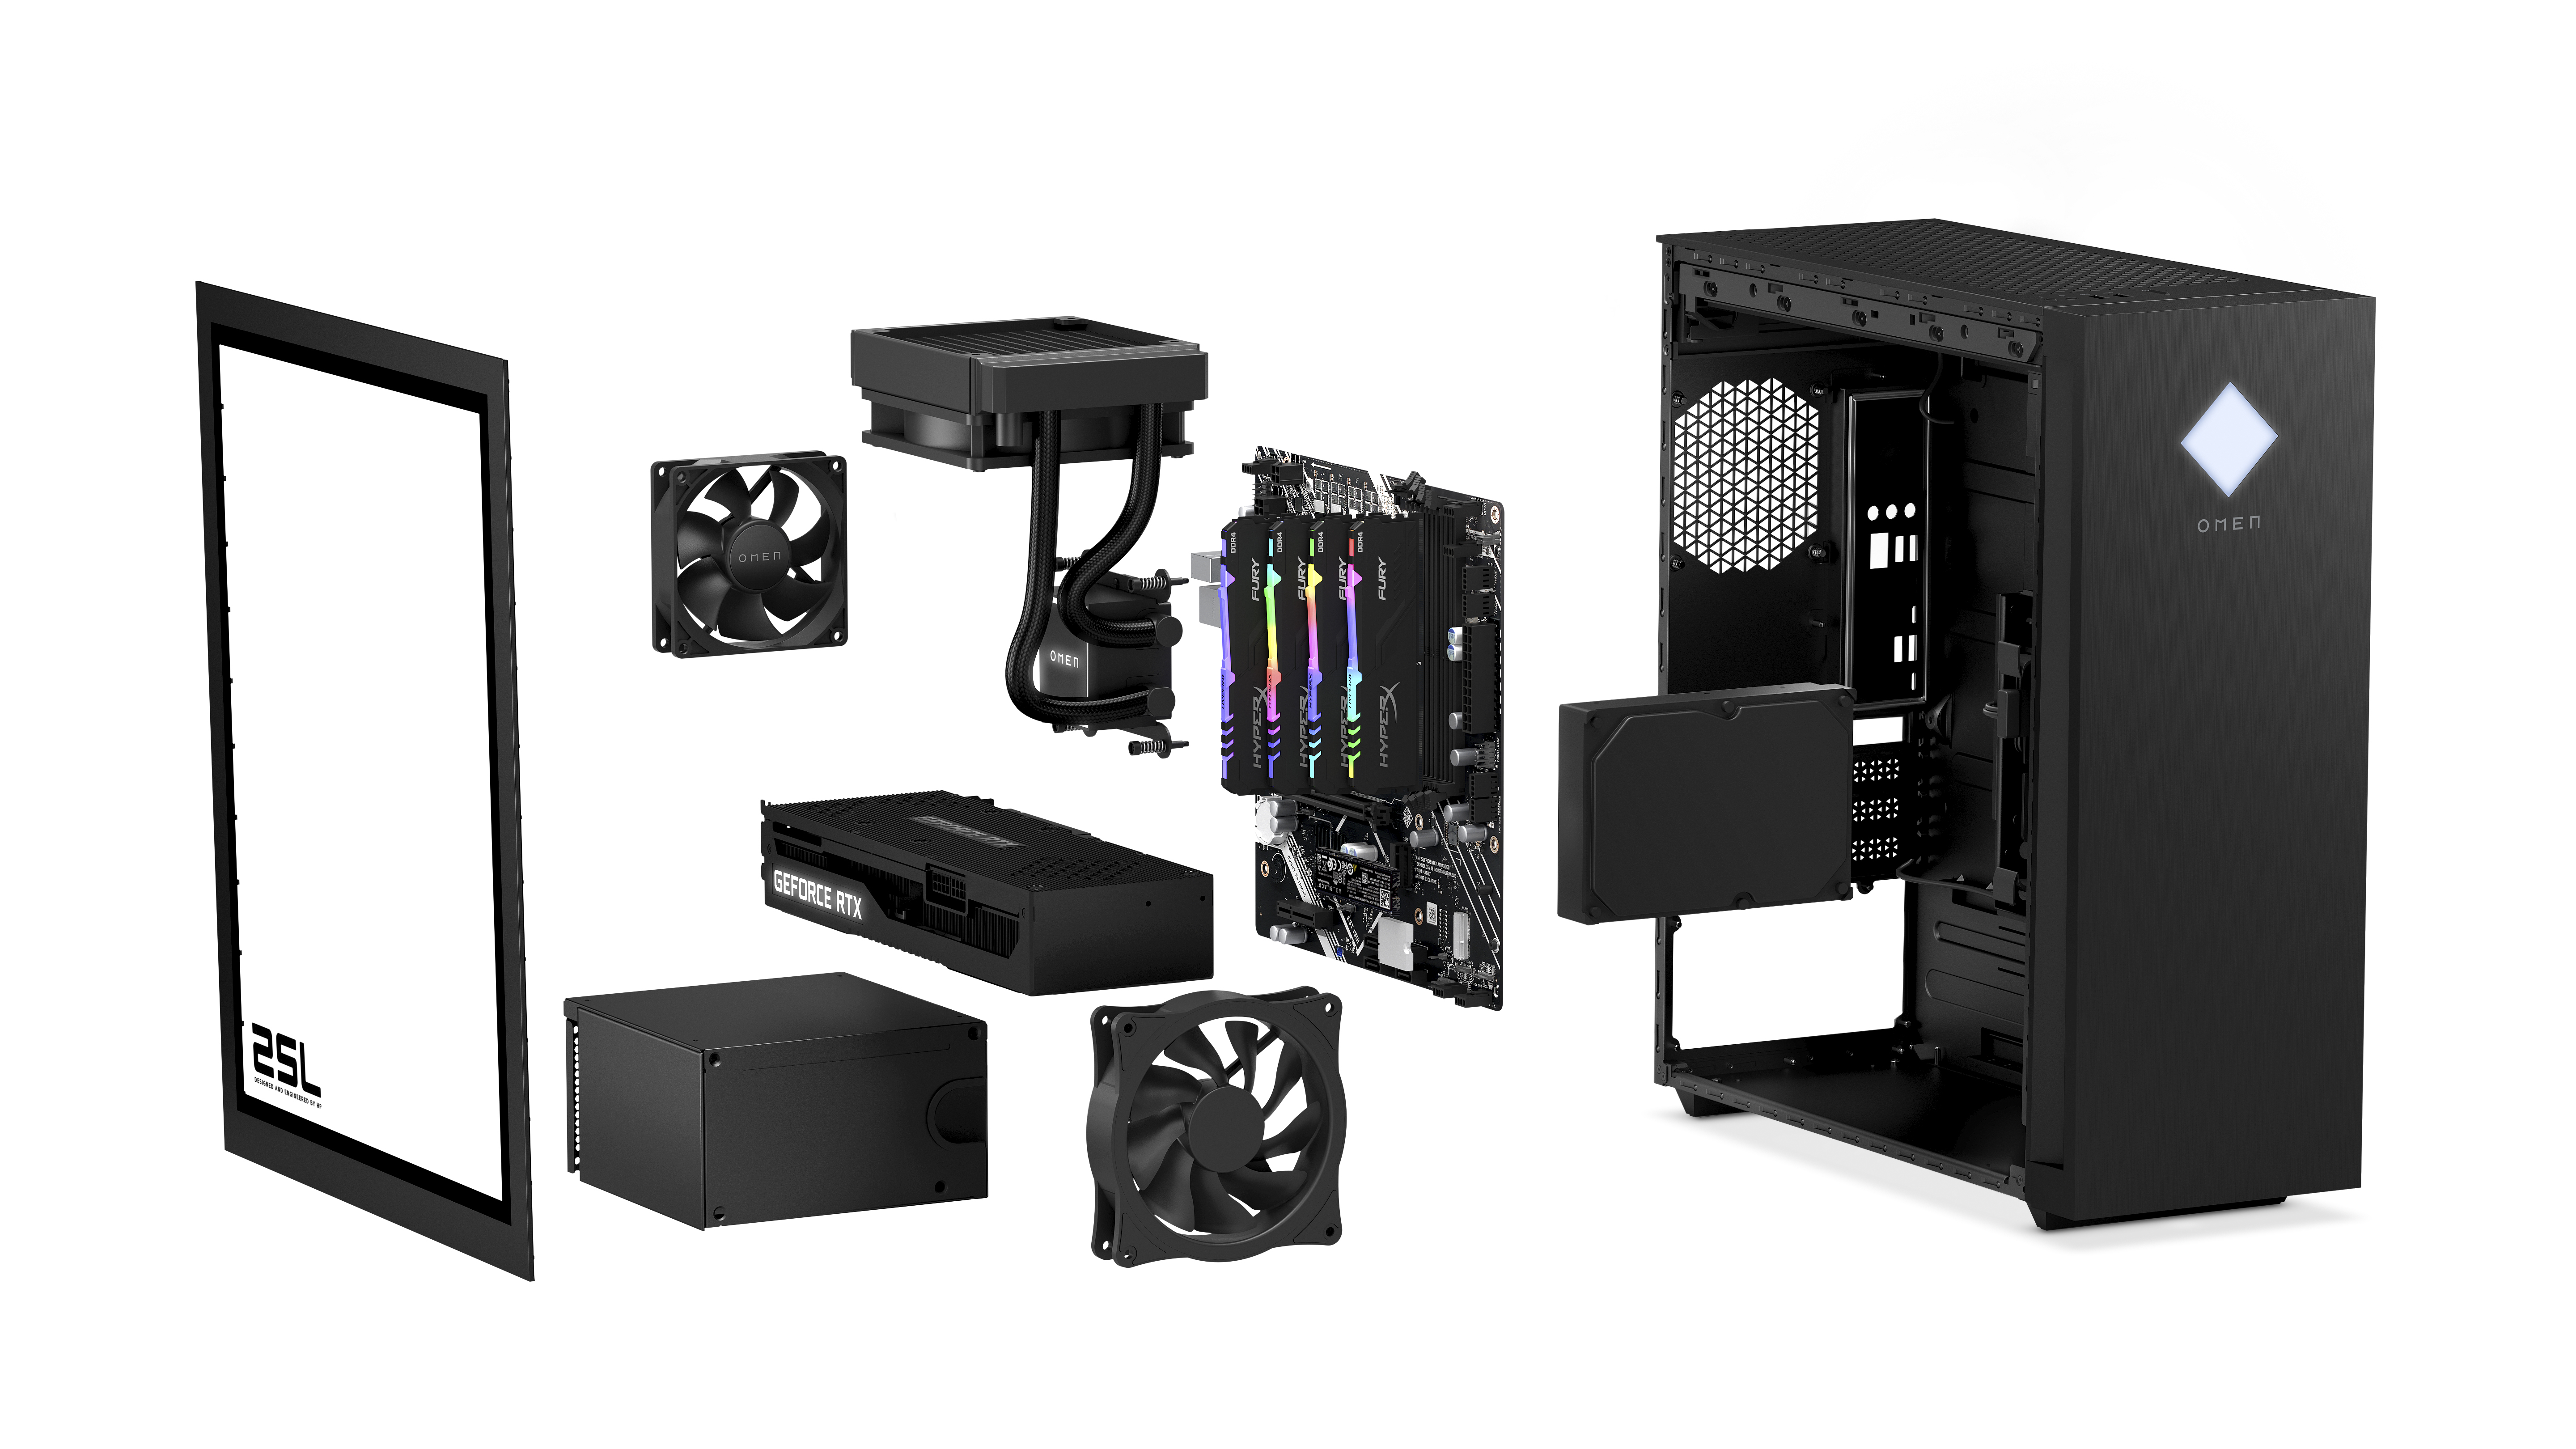 The OMEN 25L Desktop continues to cater to DIY upgradability with space for an industry standard Micro ATX motherboard, two M.2 PCIeGen SSD slots + one 2.5/3.5 storage tray, three fan locations, four DDR4 memory DIMM slots, and up to a 155m ATX power supply.